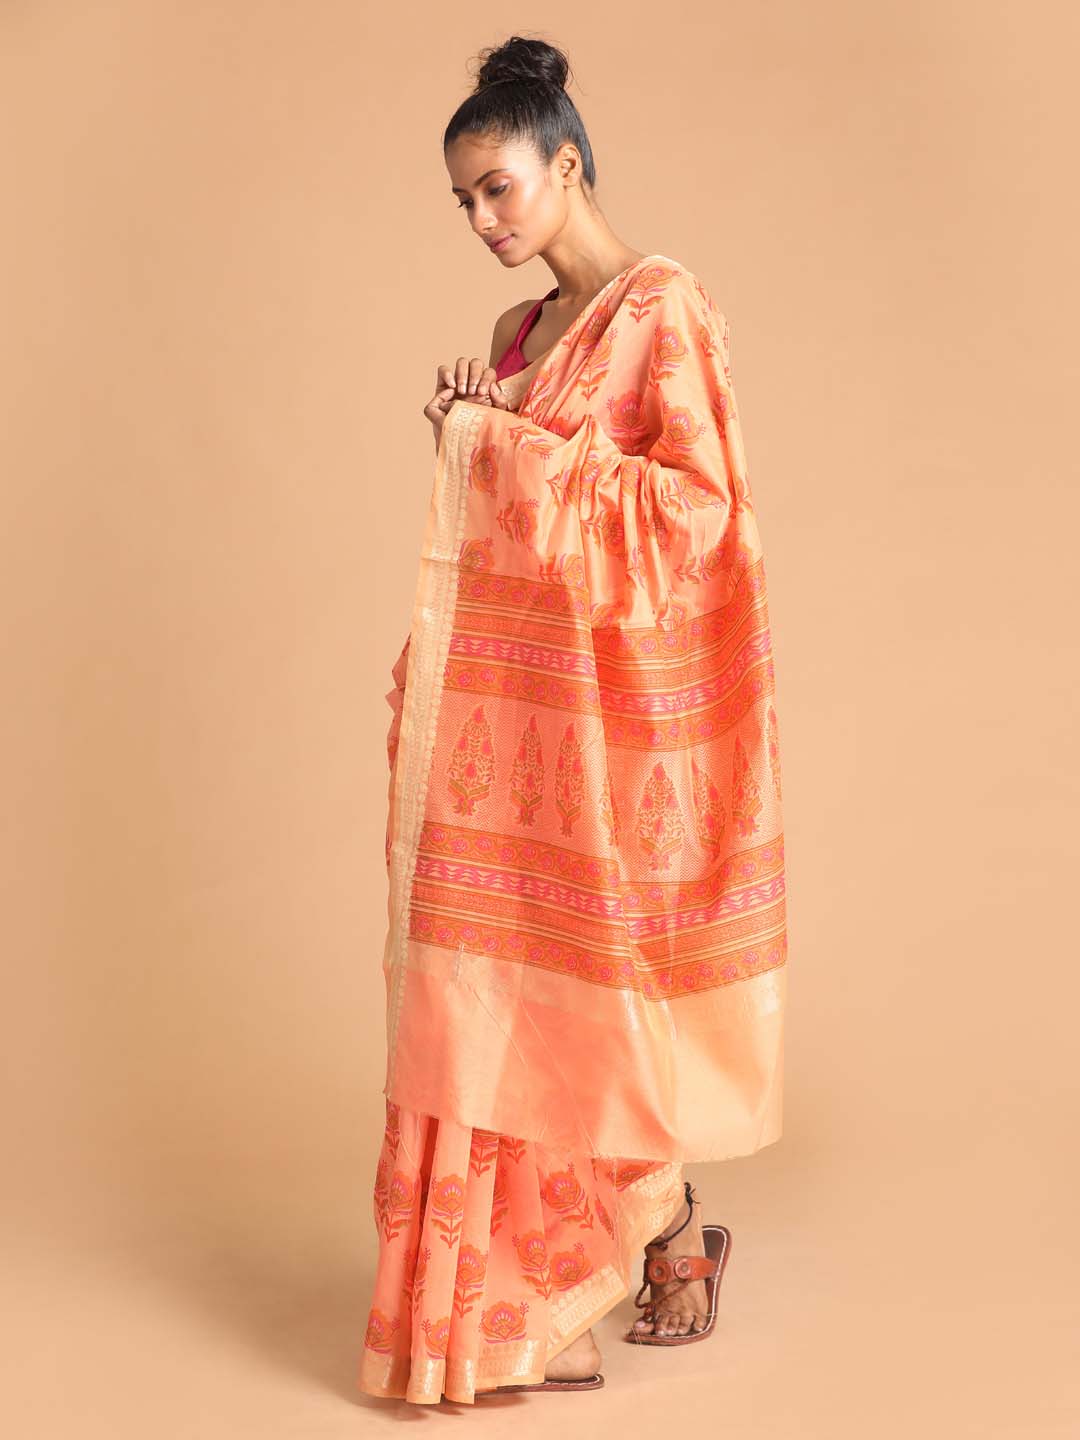 Indethnic Printed Cotton Blend Saree in Coral - View 2